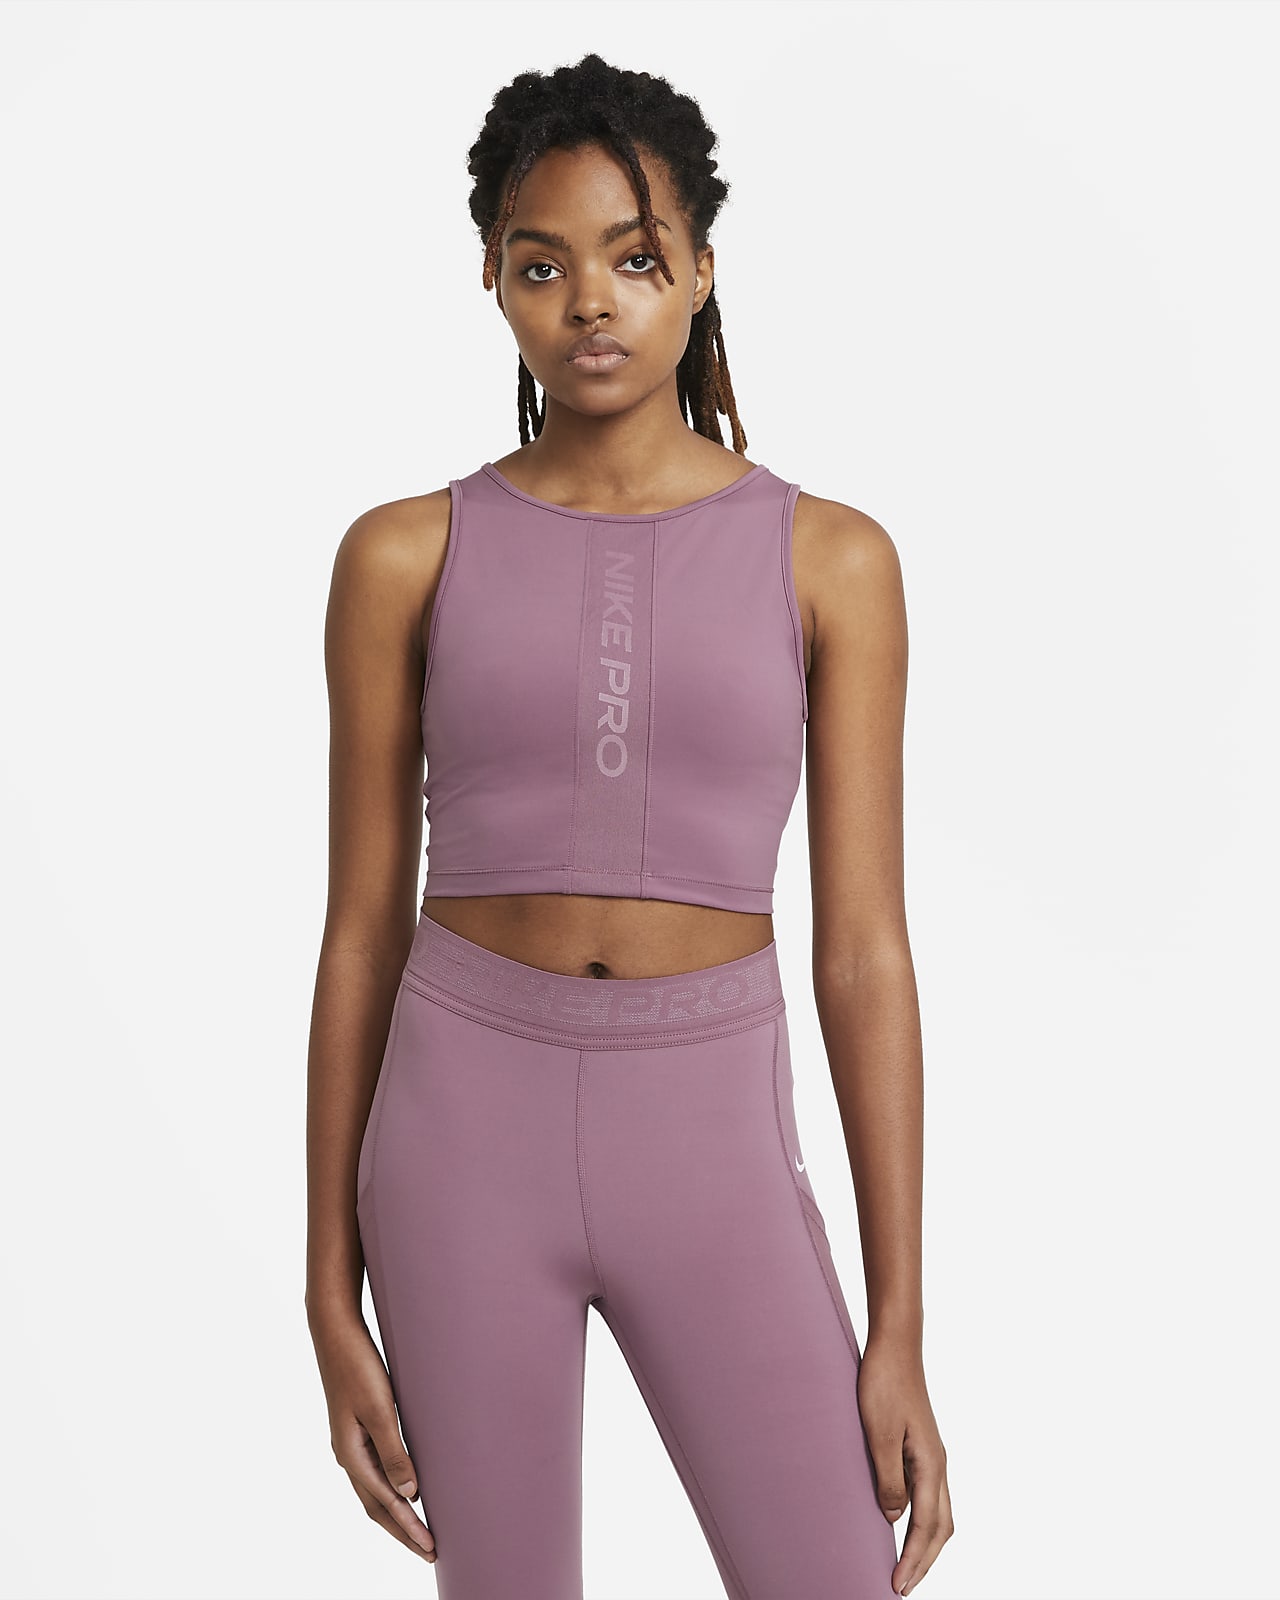 nike tank with built in sports bra